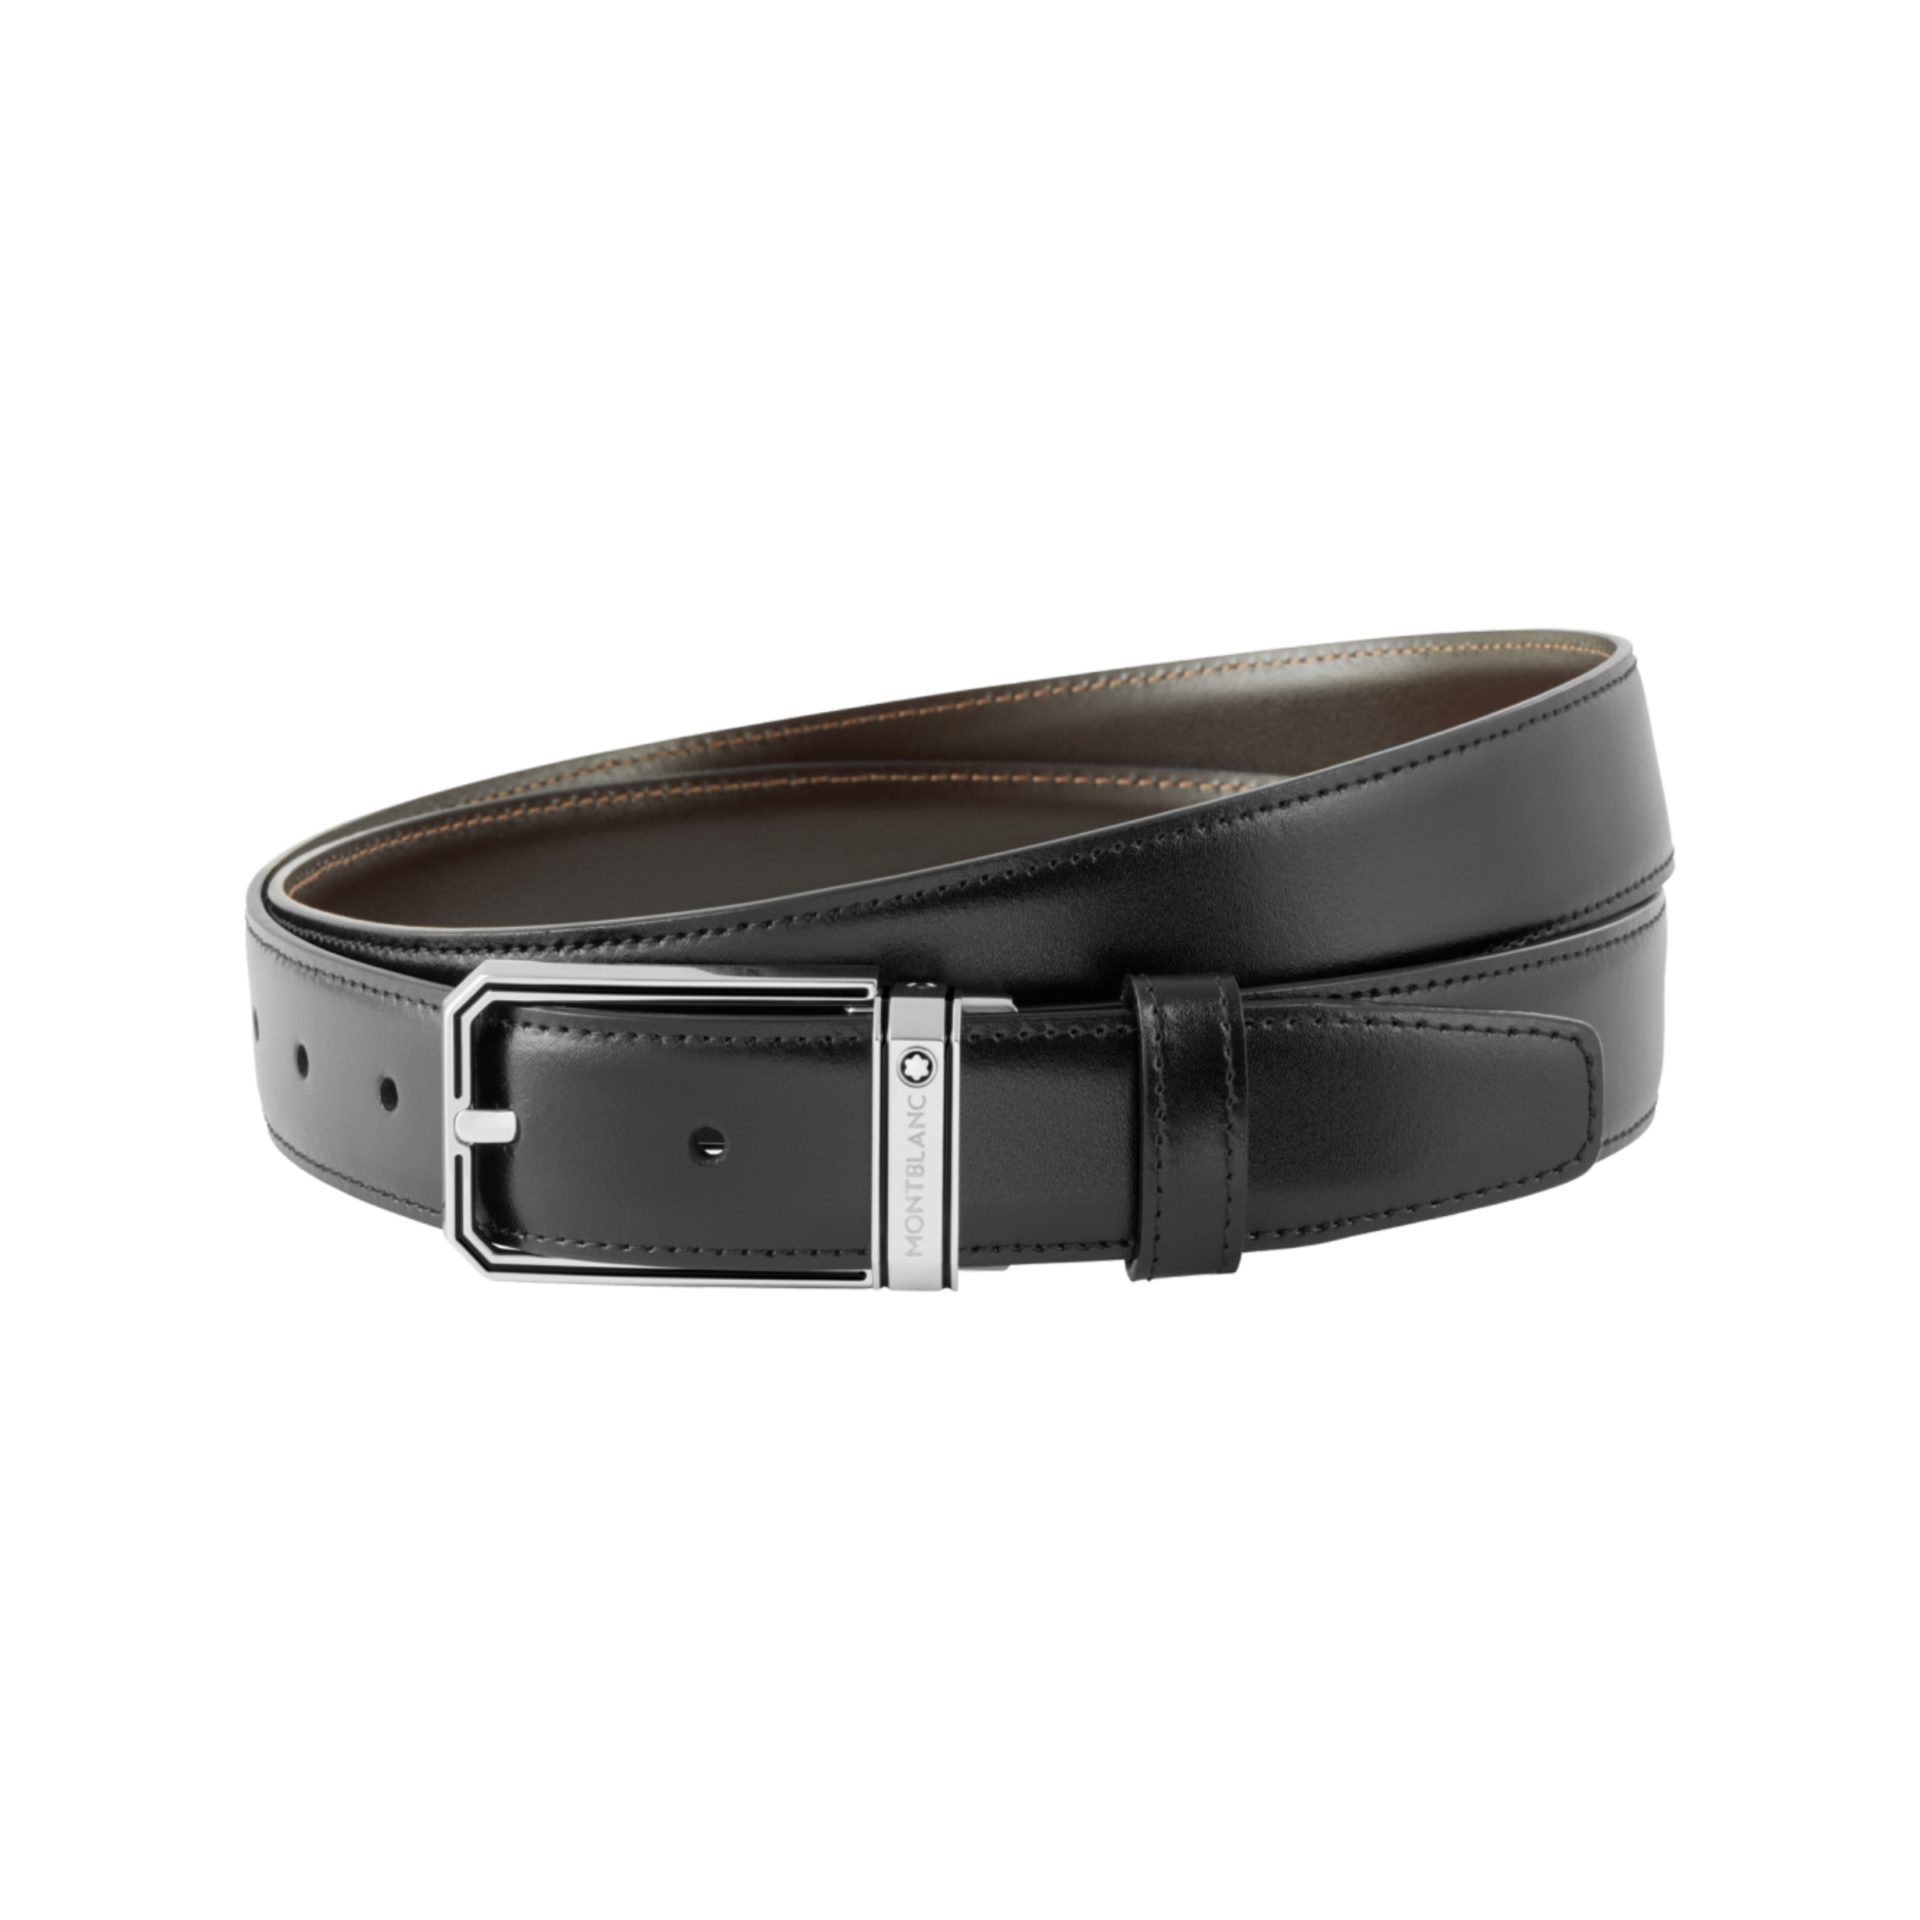 Purchase Montblanc Belt With Stainless Steel Buckle